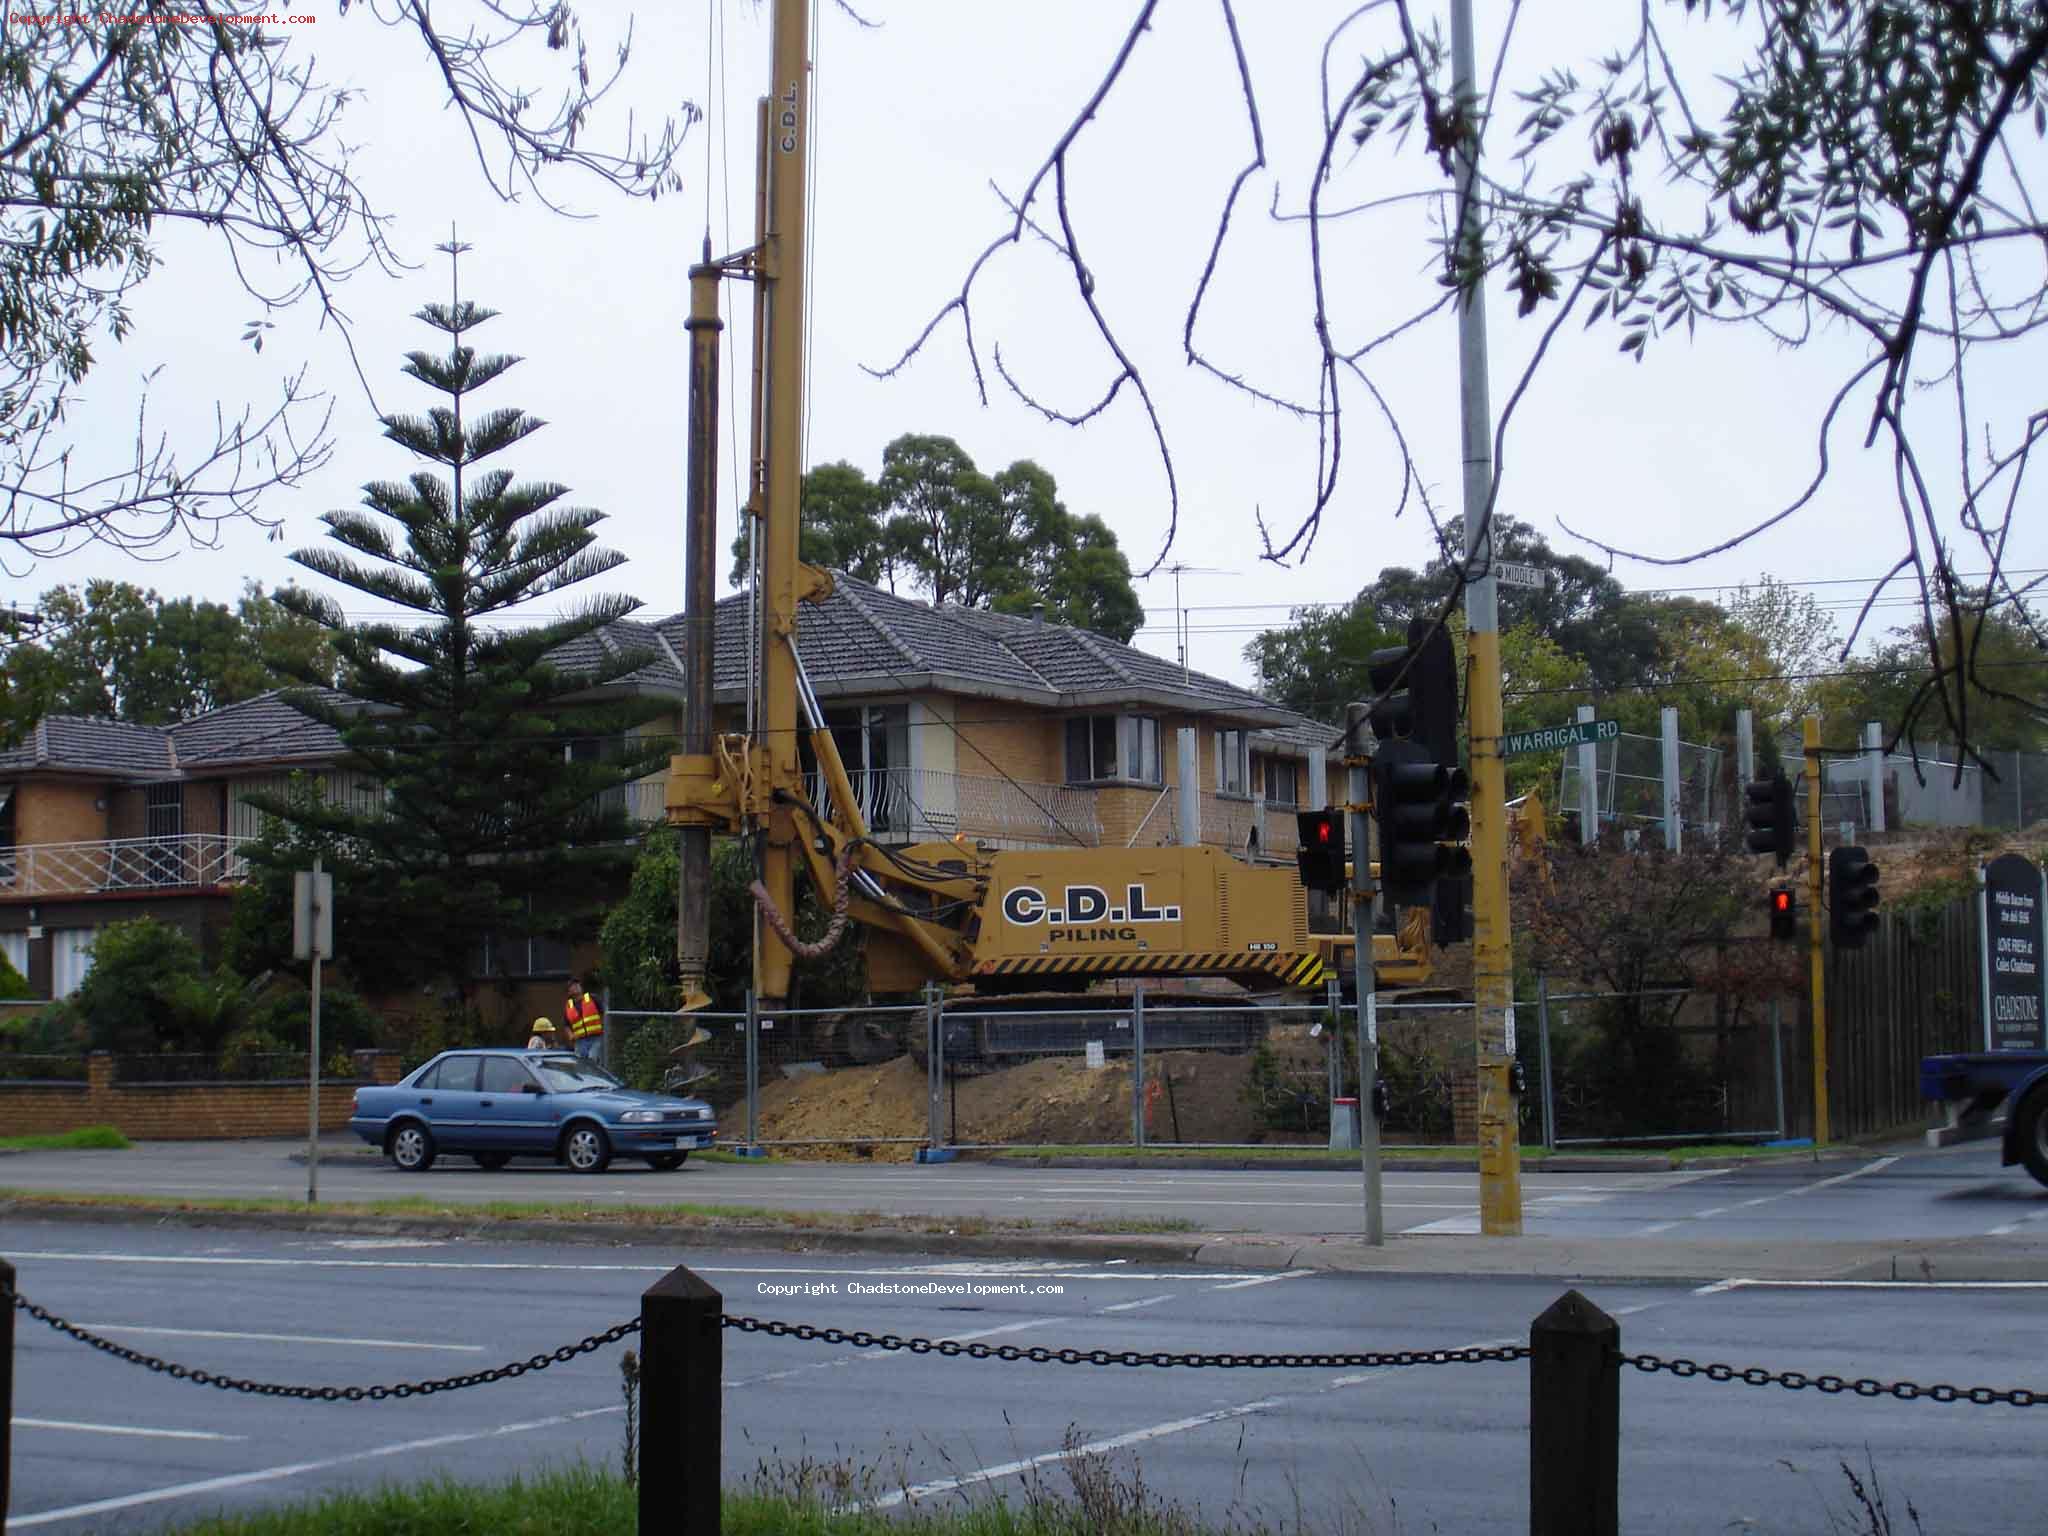 Wall post drilling at Warrigal Rd - Chadstone Development Discussions